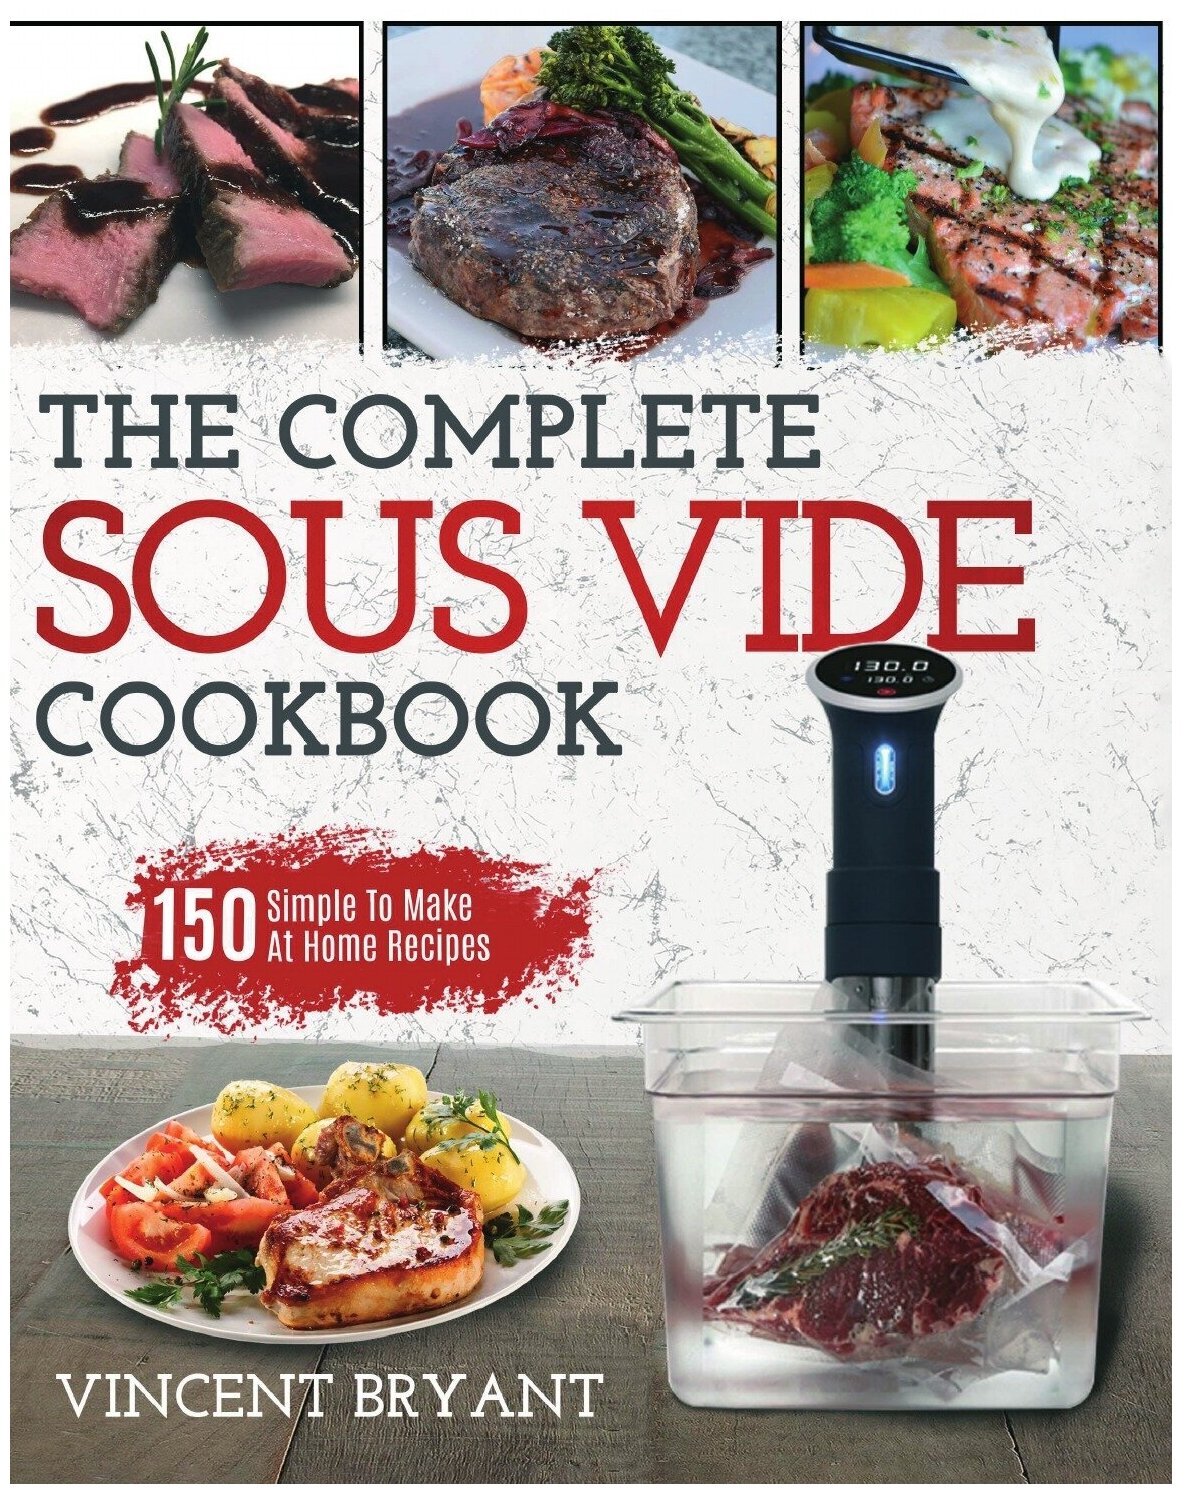 Sous Vide Cookbook. The Complete Sous Vide Cookbook 150 Simple To Make At Home Recipes